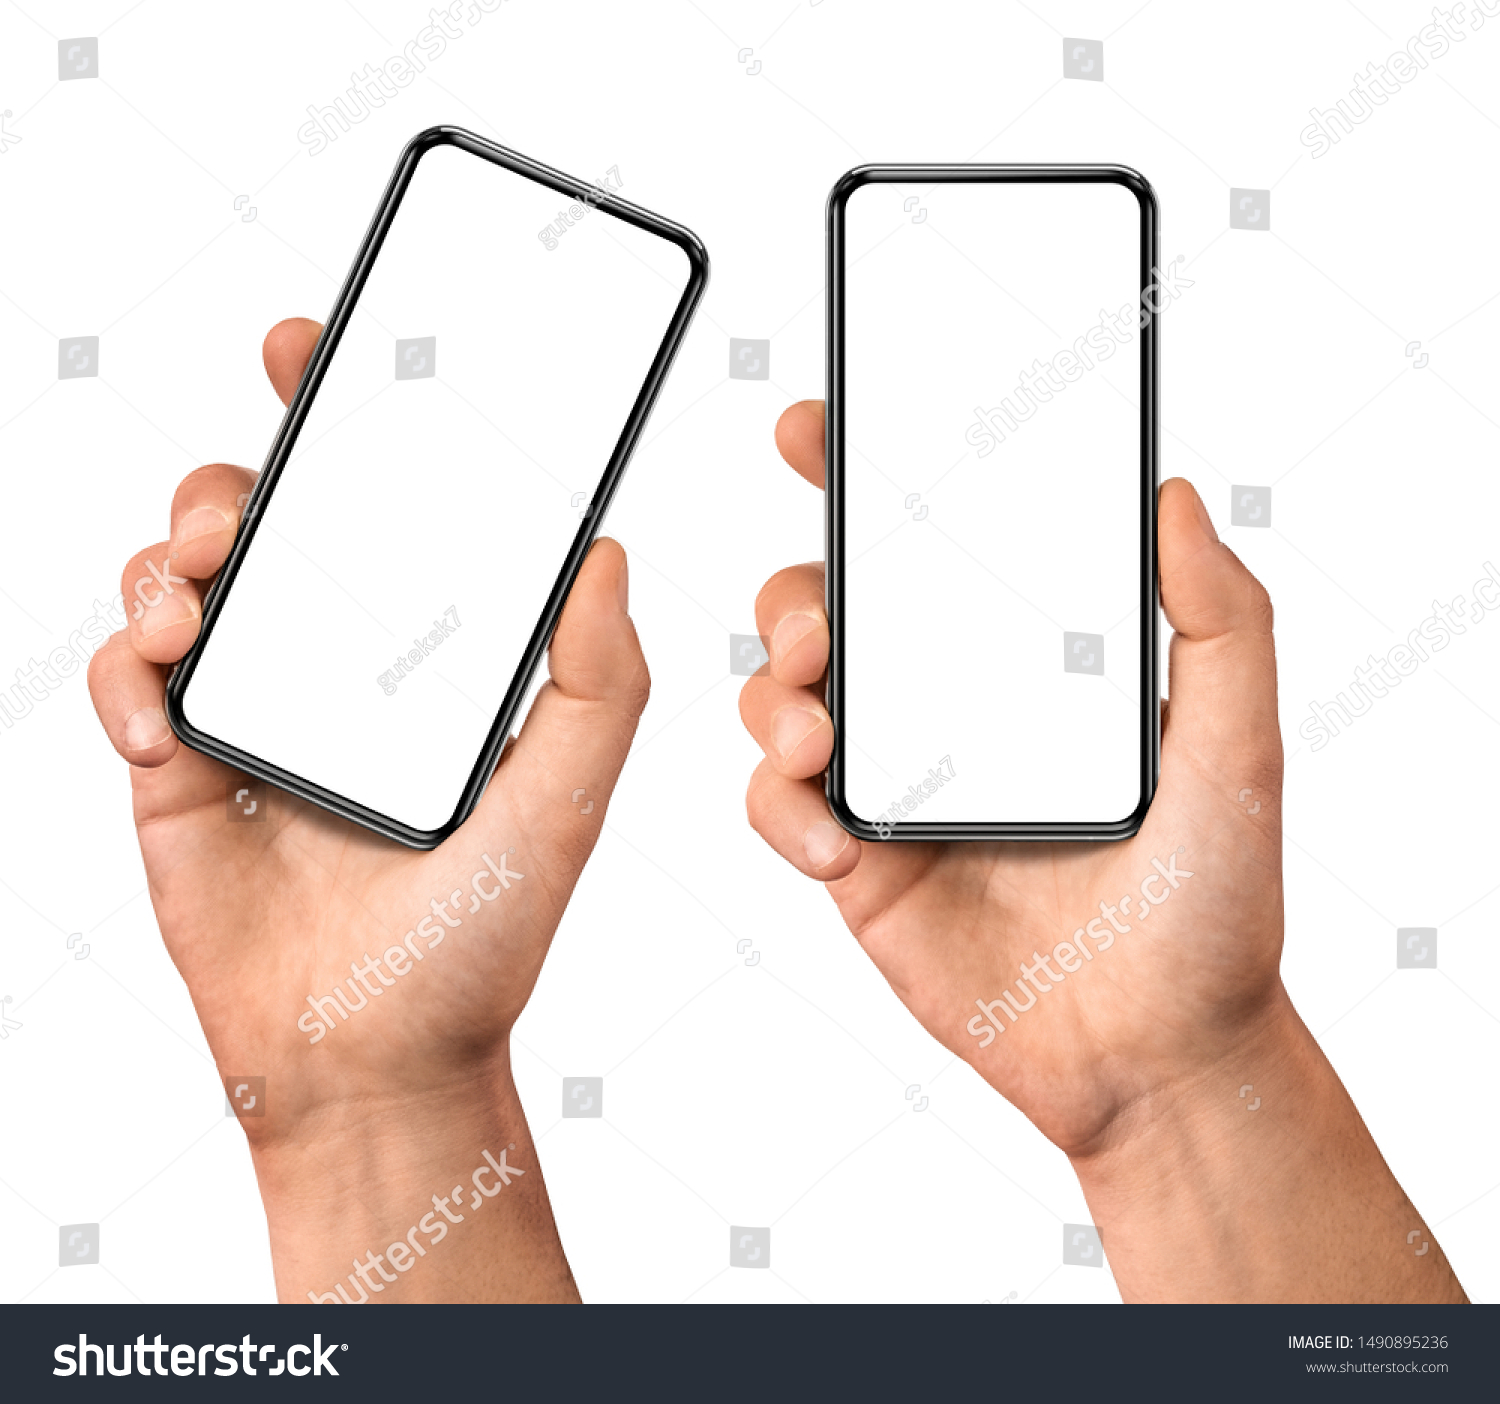 Man hand holding the black smartphone  blank screen with modern frameless design, two positions vertical and rotated - isolated on white background